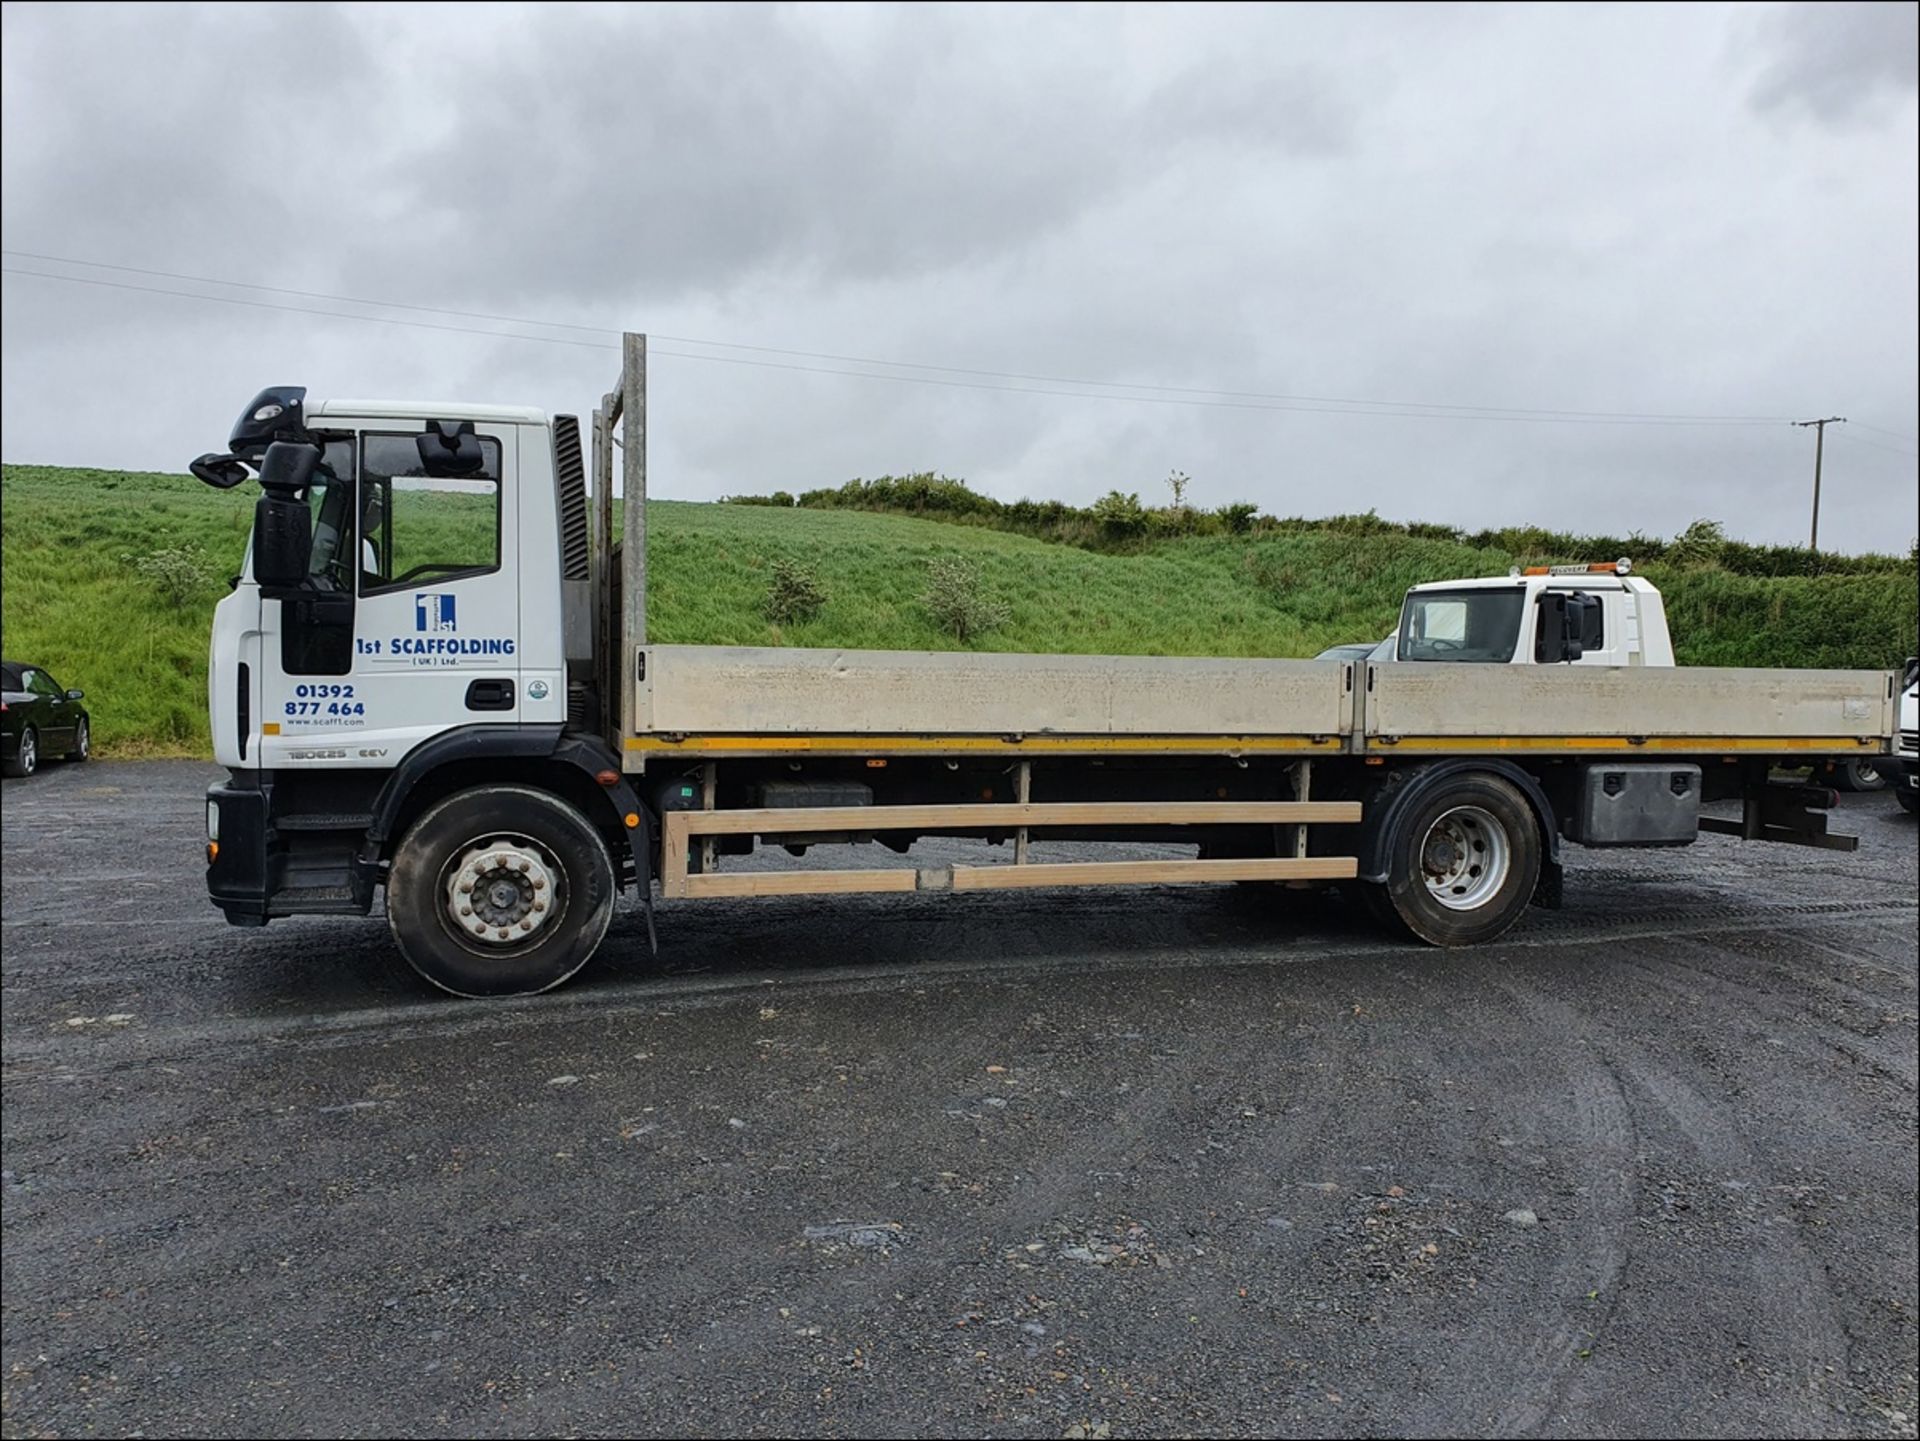 12/62 IVECO EUROCARGO (MY 2008) - 5880cc 2dr Flat Bed (White, 148k) - Image 11 of 16